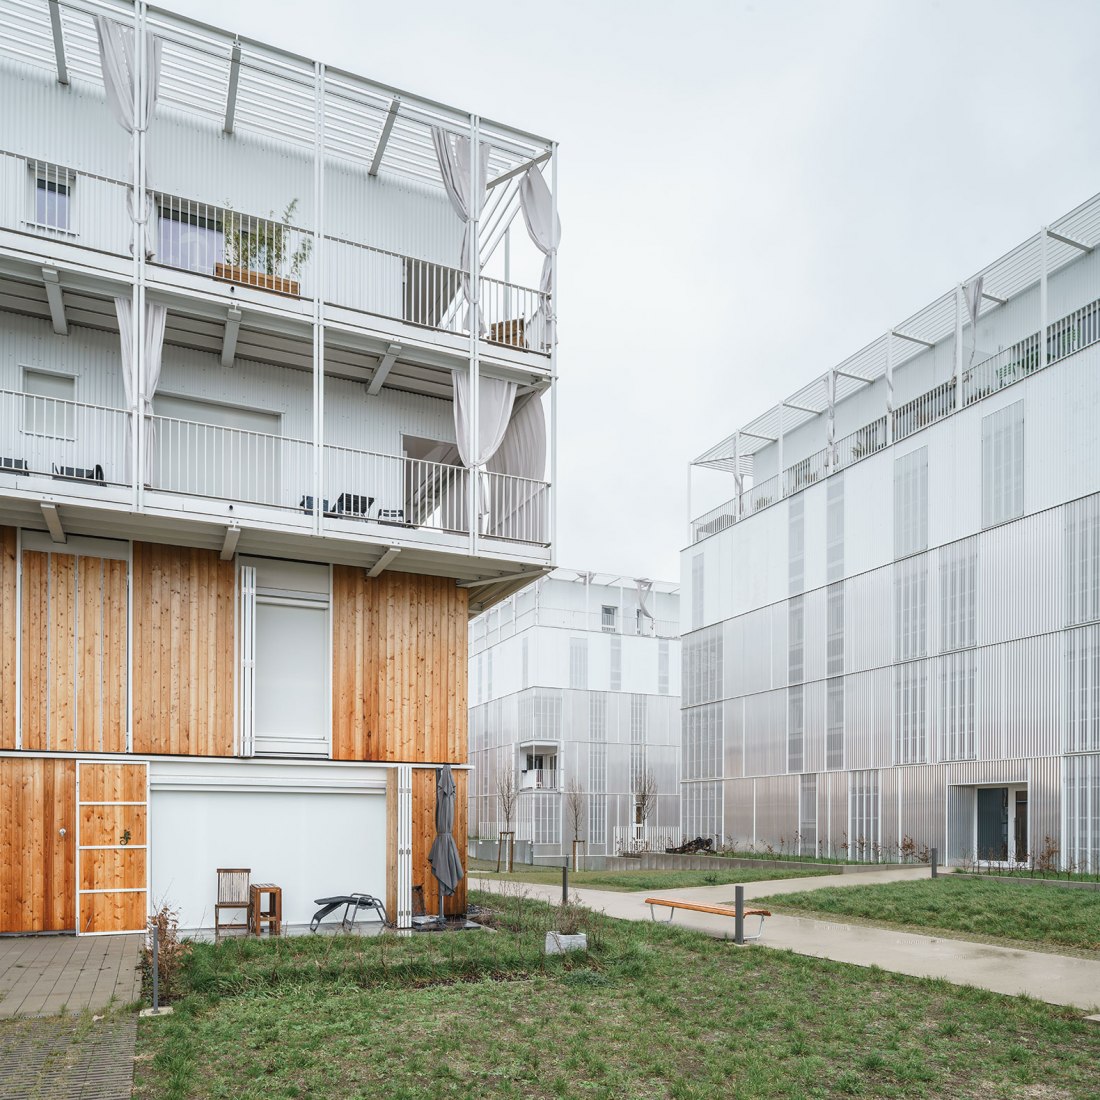 Housing buildings in Kiem, Luxembourg, by Amann, Cánovas, Maruri + Adelino Magalhaes. Photograph by Miguel Fernández Galiano.